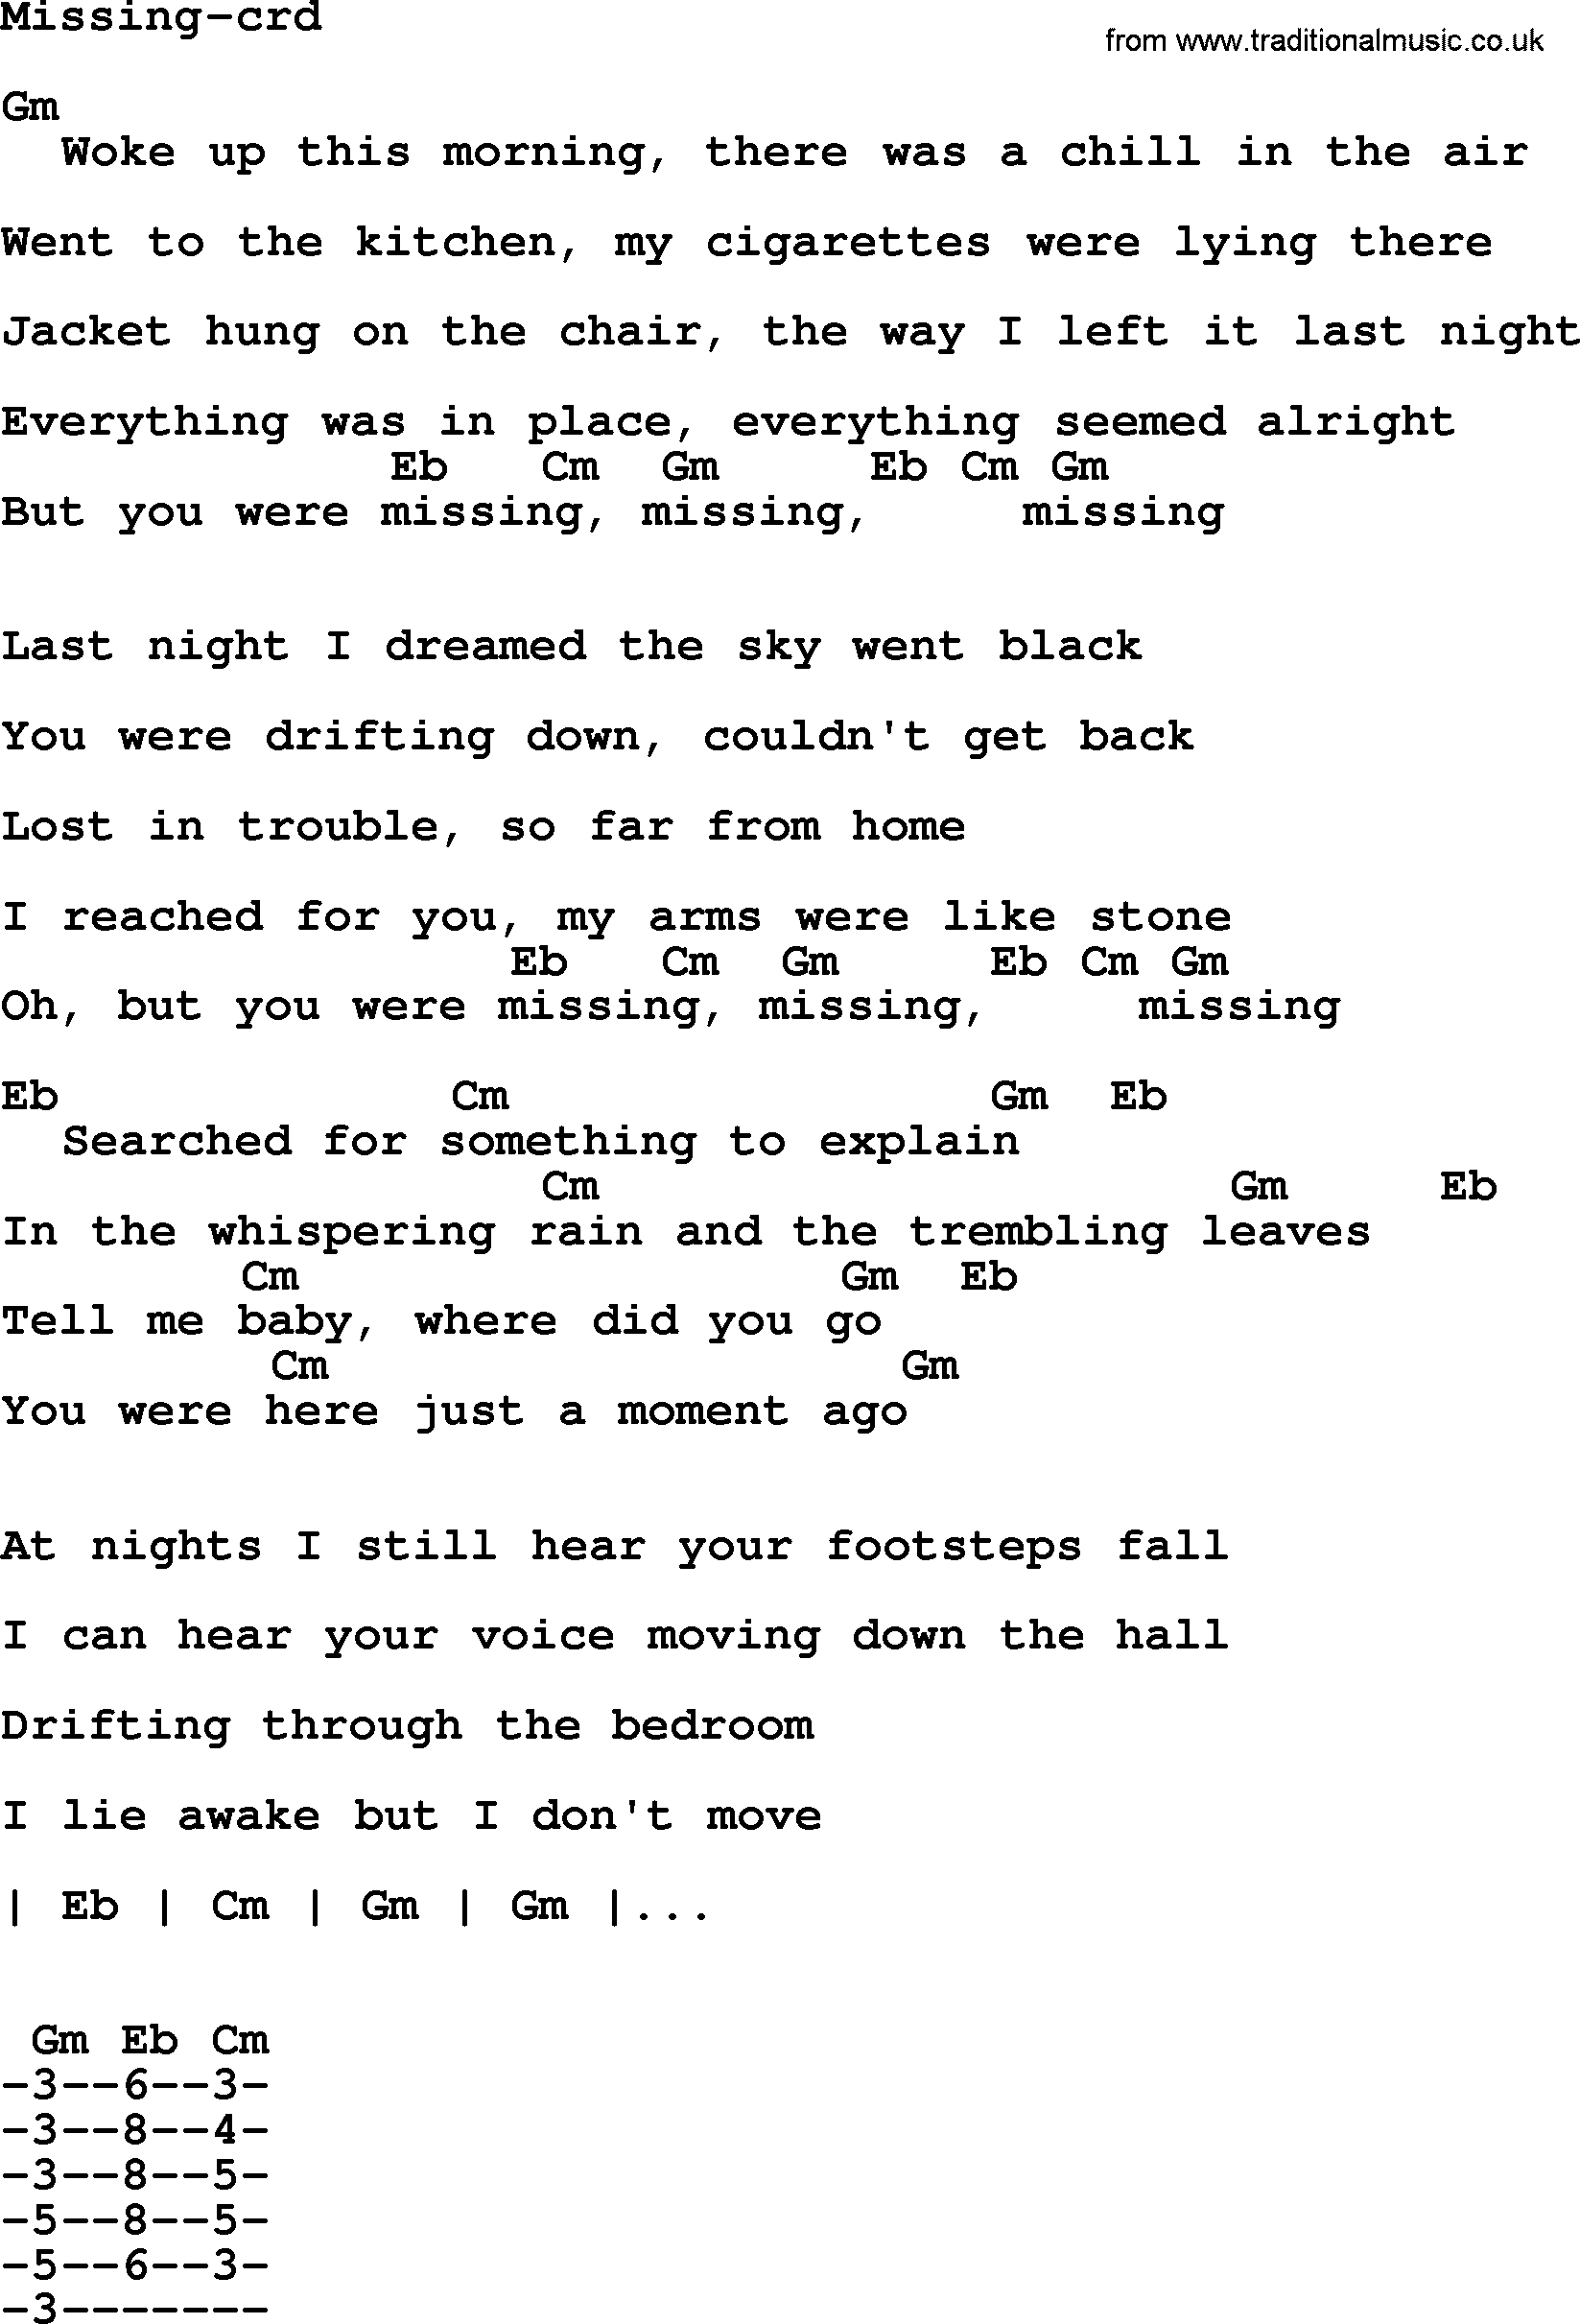 Bruce Springsteen song: Missing, lyrics and chords